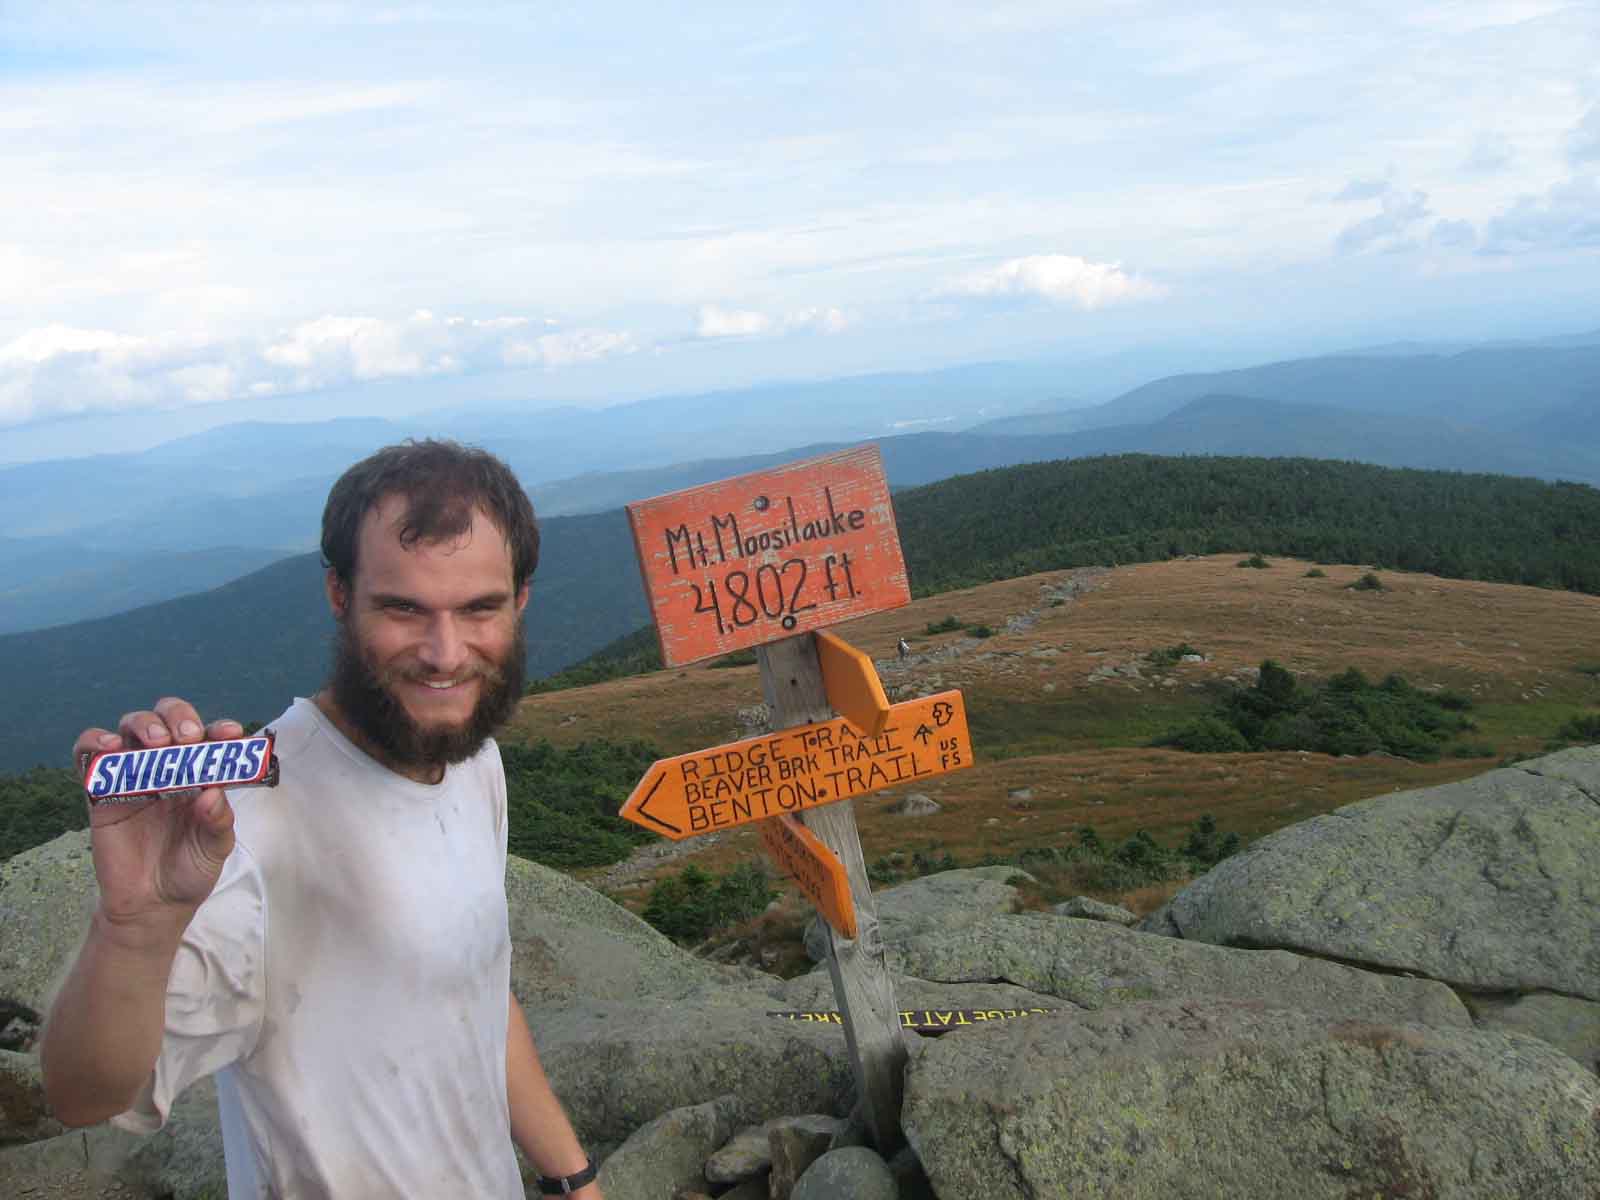 Optimus and his Snicker bar at the summit of Moosilauke.